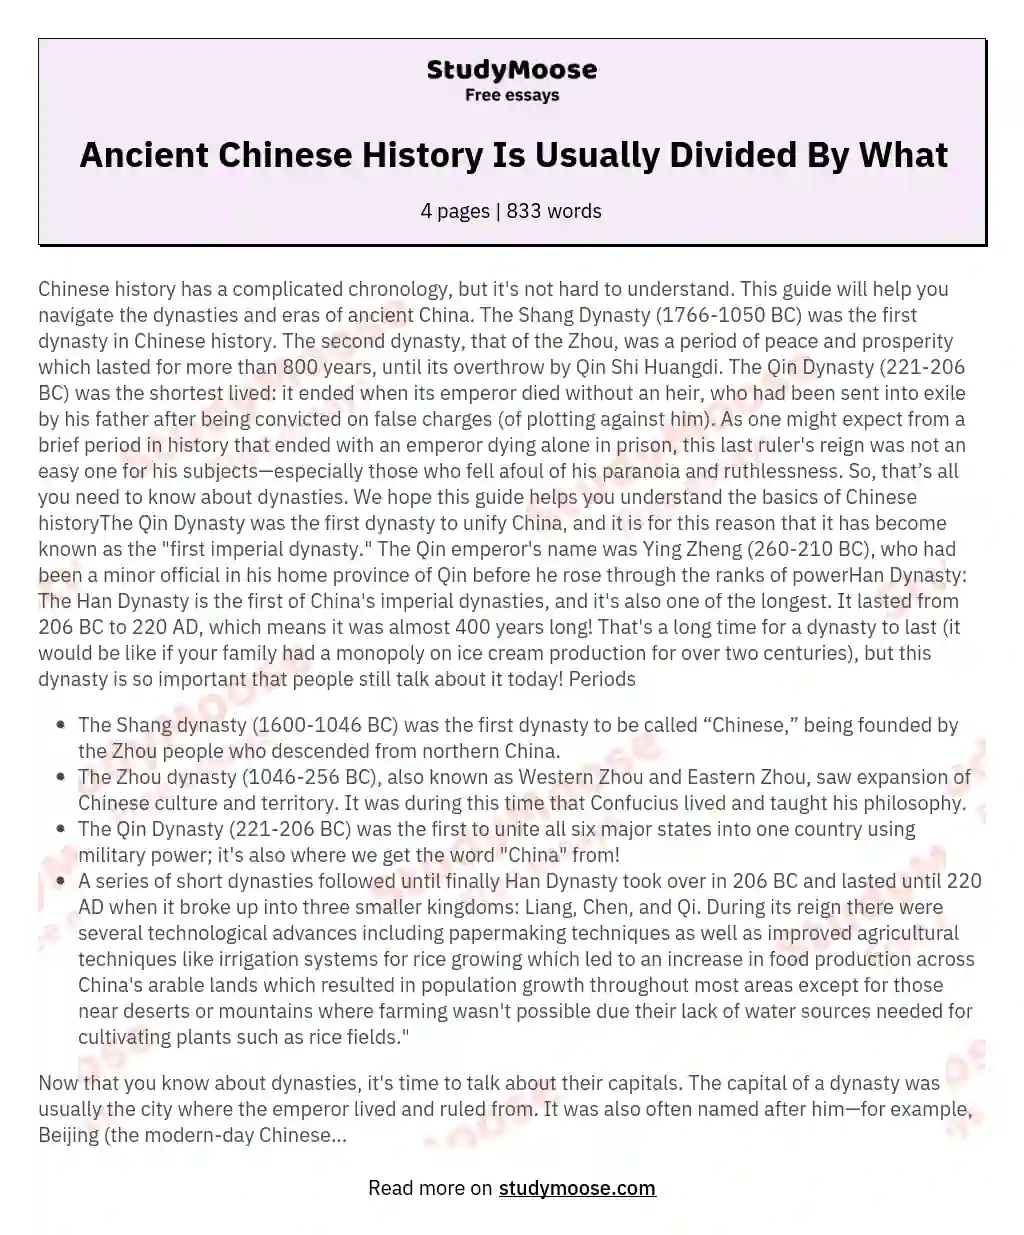 Ancient Chinese History Is Usually Divided By What essay